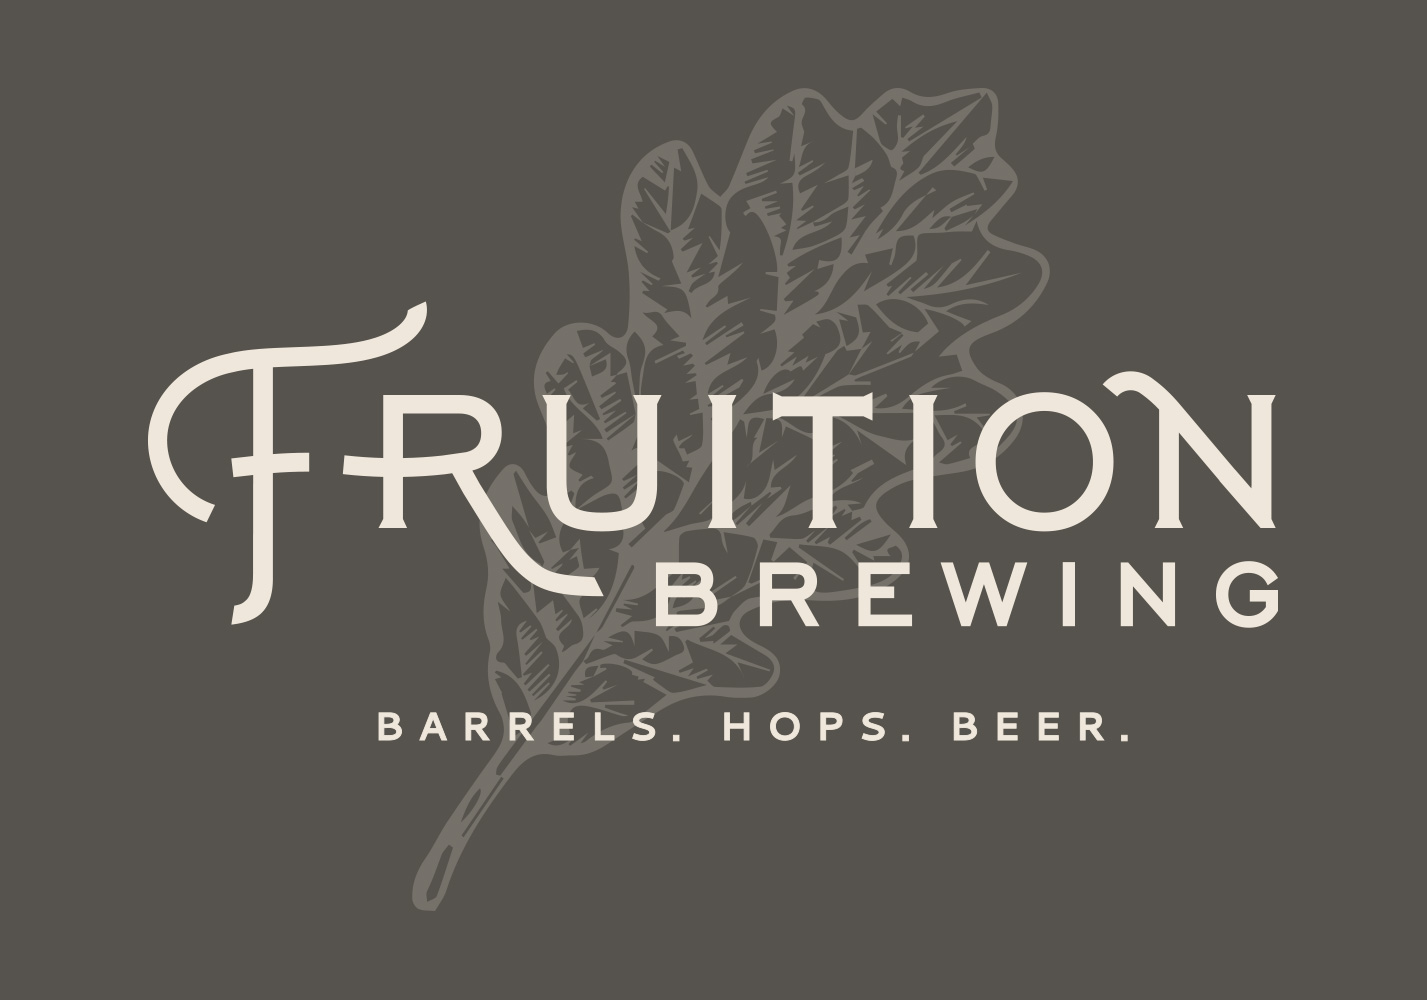 Fruition Brewing